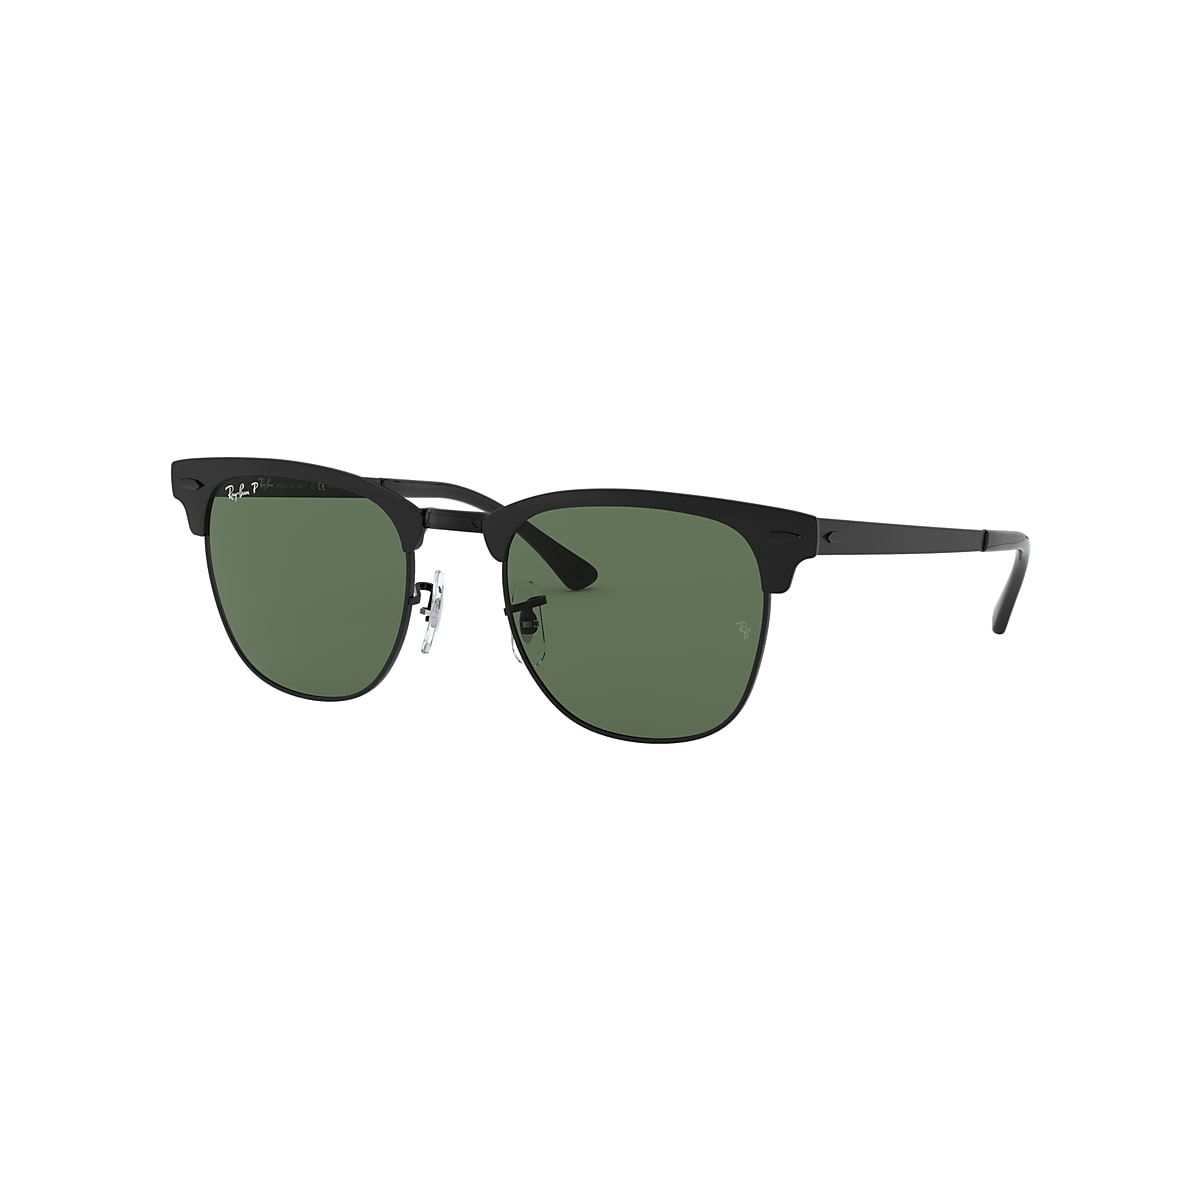 CLUBMASTER METAL Sunglasses in Black and Green - RB3716 | Ray-Ban® US